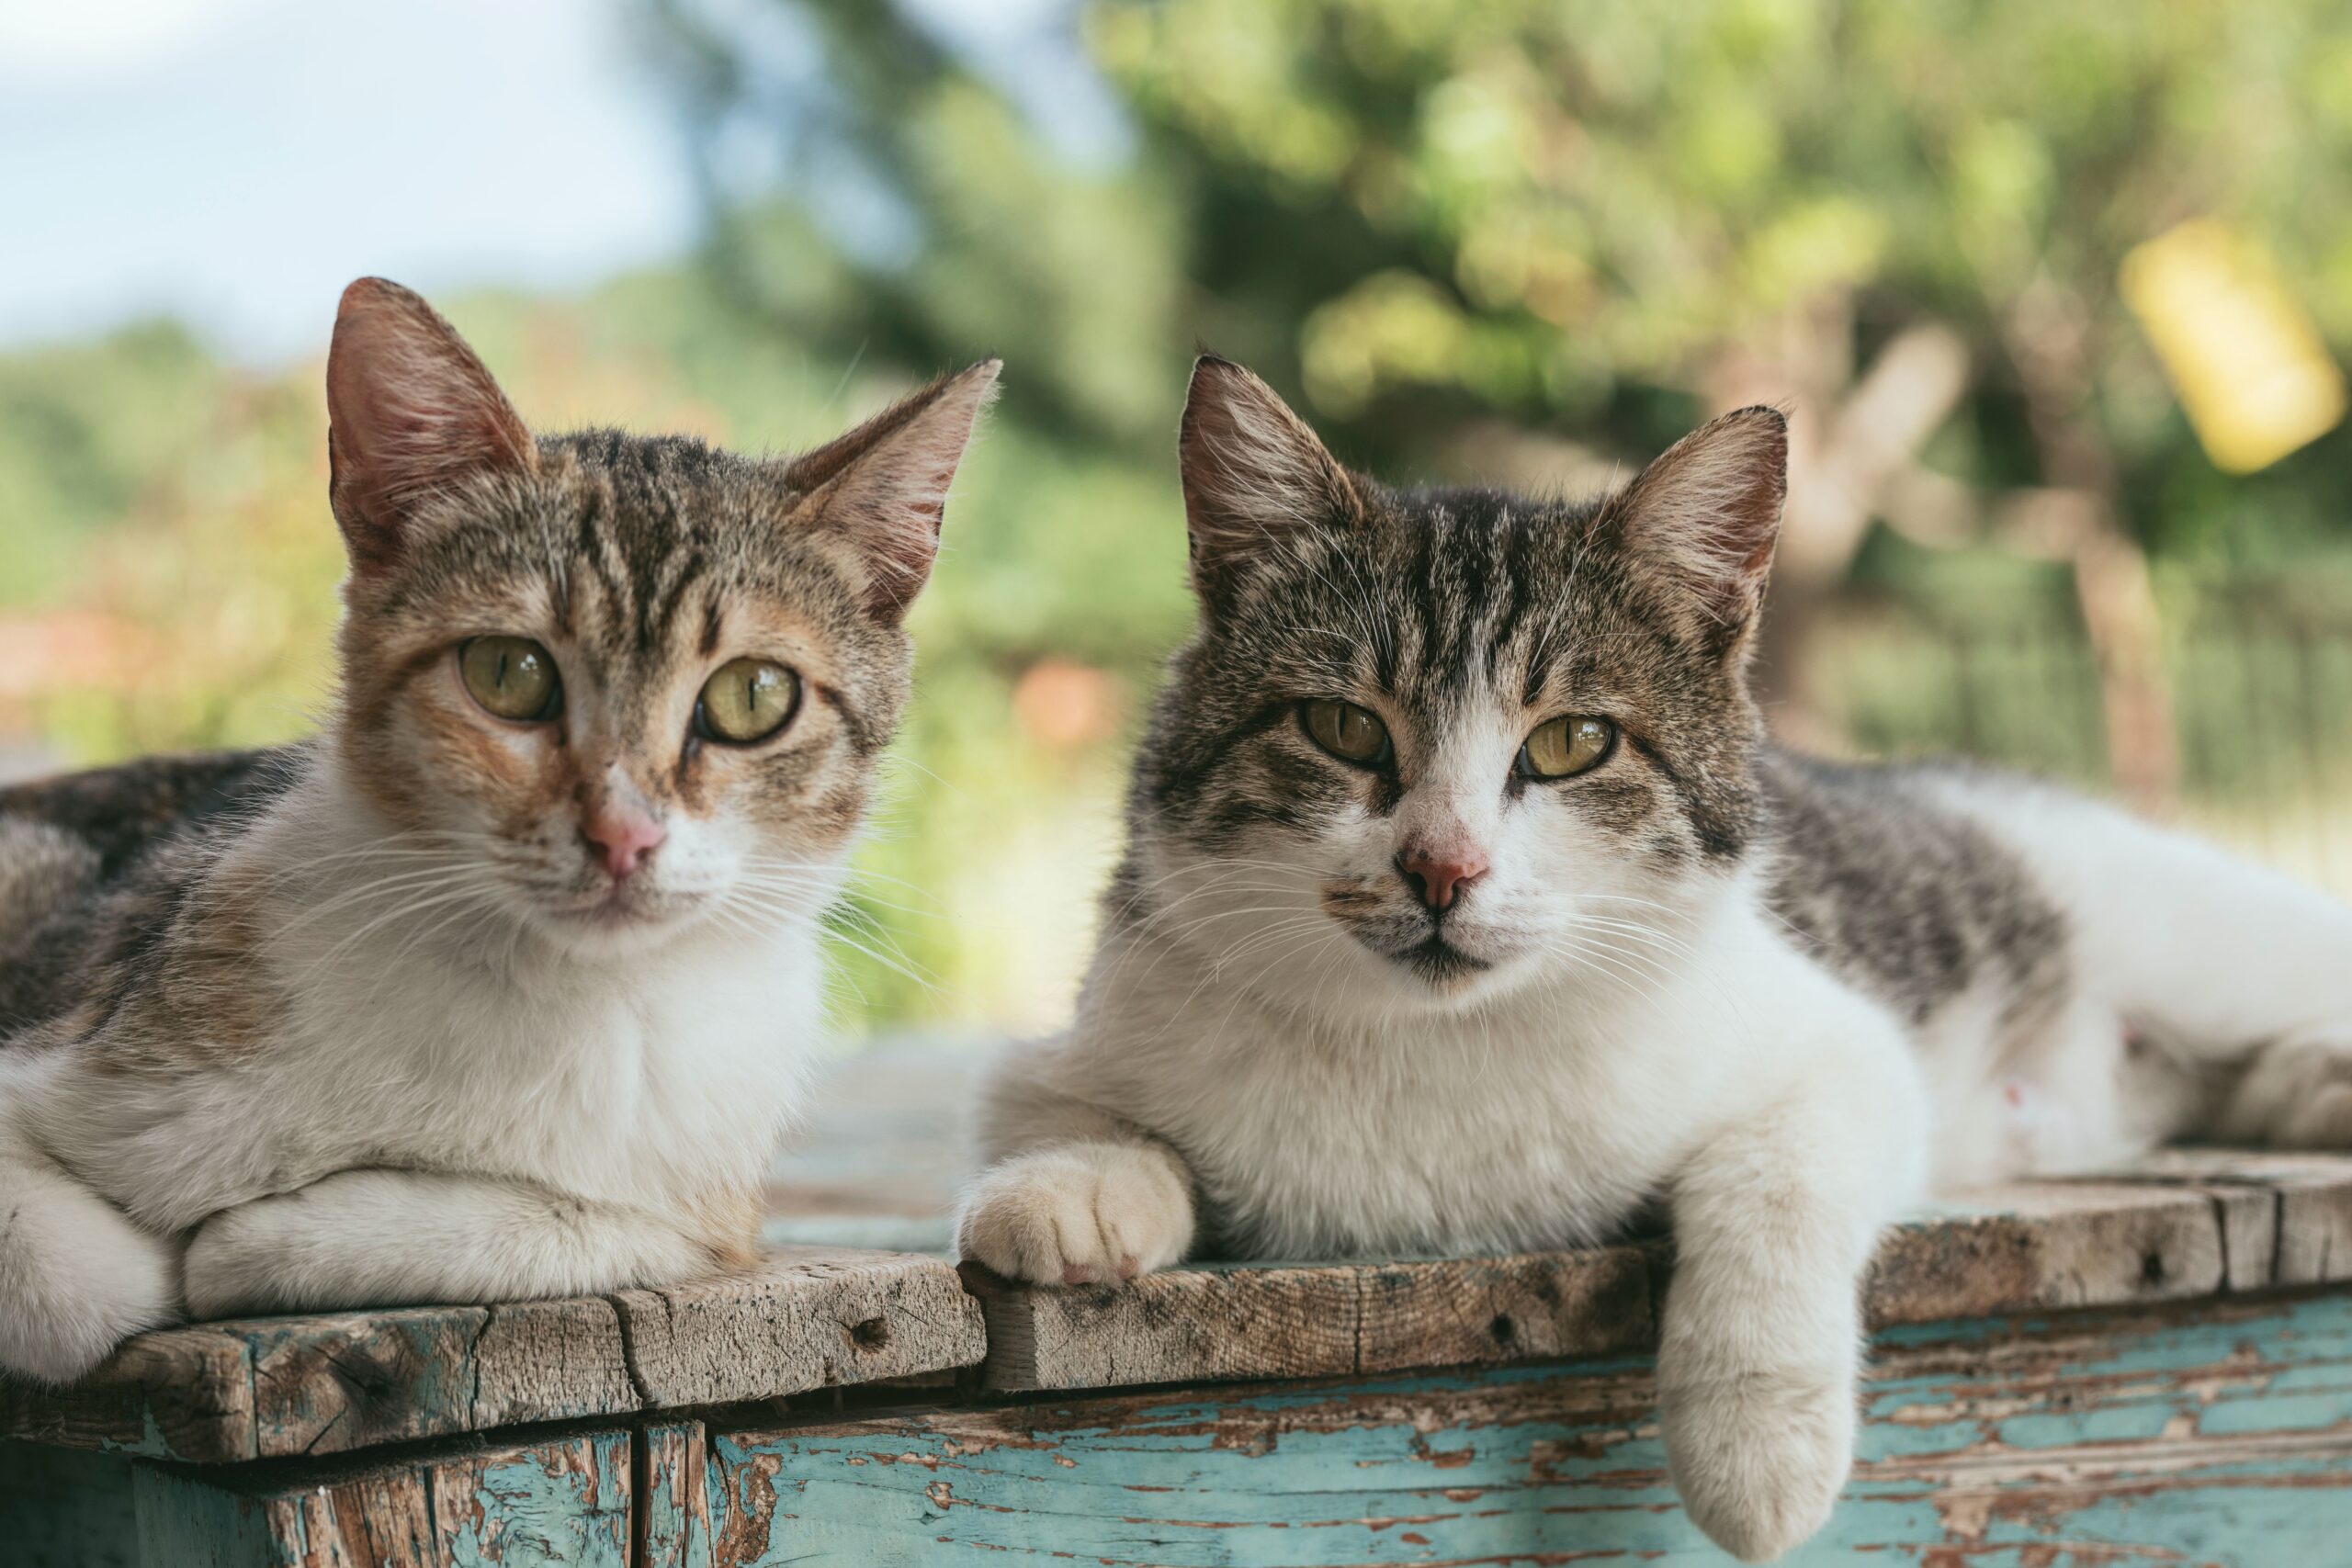 Why Adopting a Feral Cat Is Not an Option